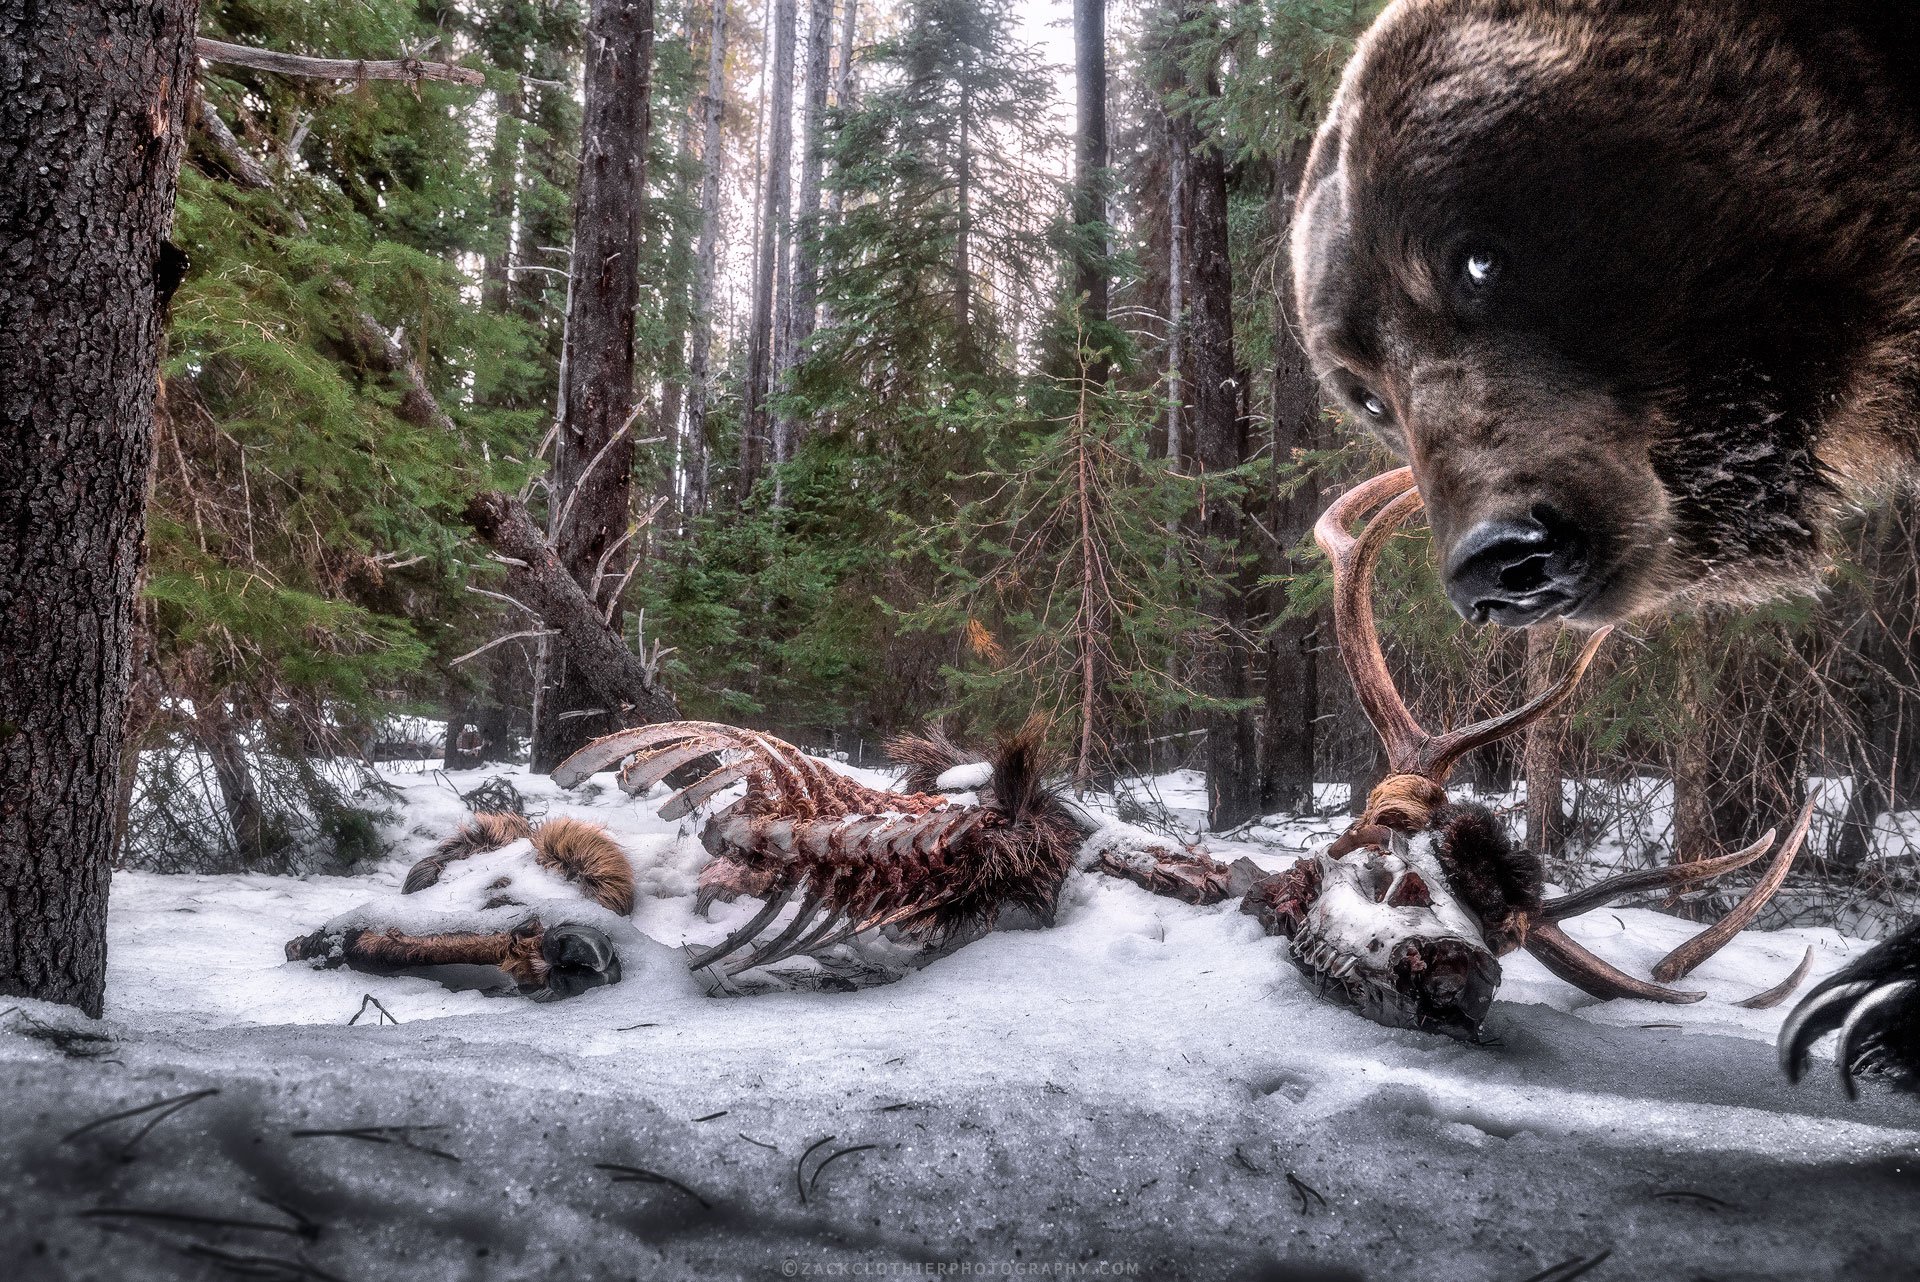 Grizzly-Remains-Fine-Art-Photography-Print-DSLR-Camera-Trap.jpg